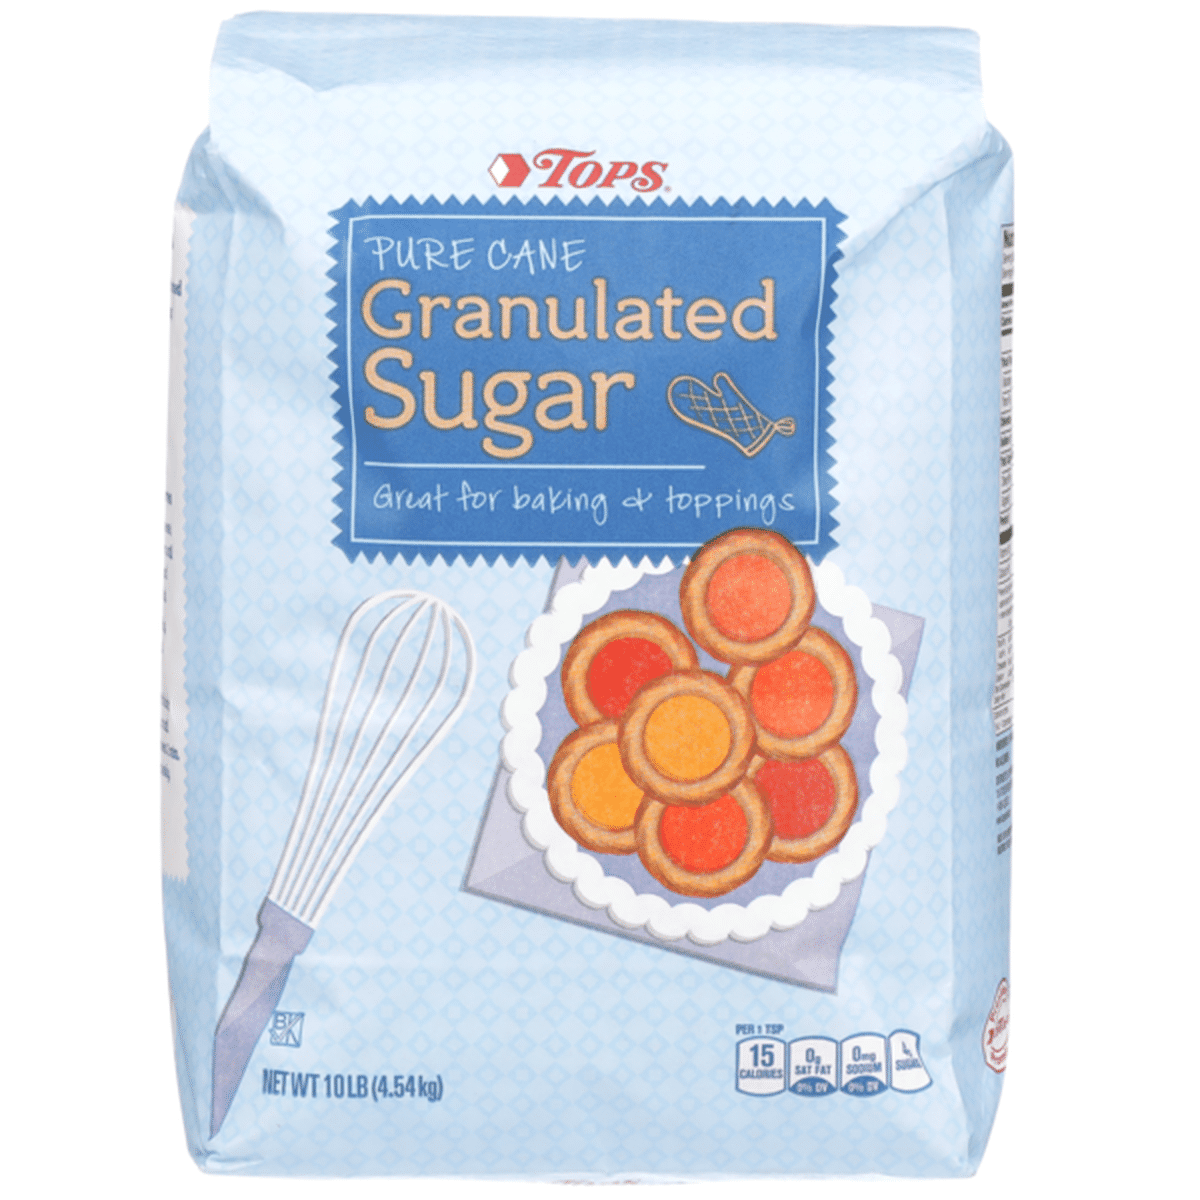 TOPS Pure Cane Granulated Sugar (10 lb) Delivery or Pickup Near Me 